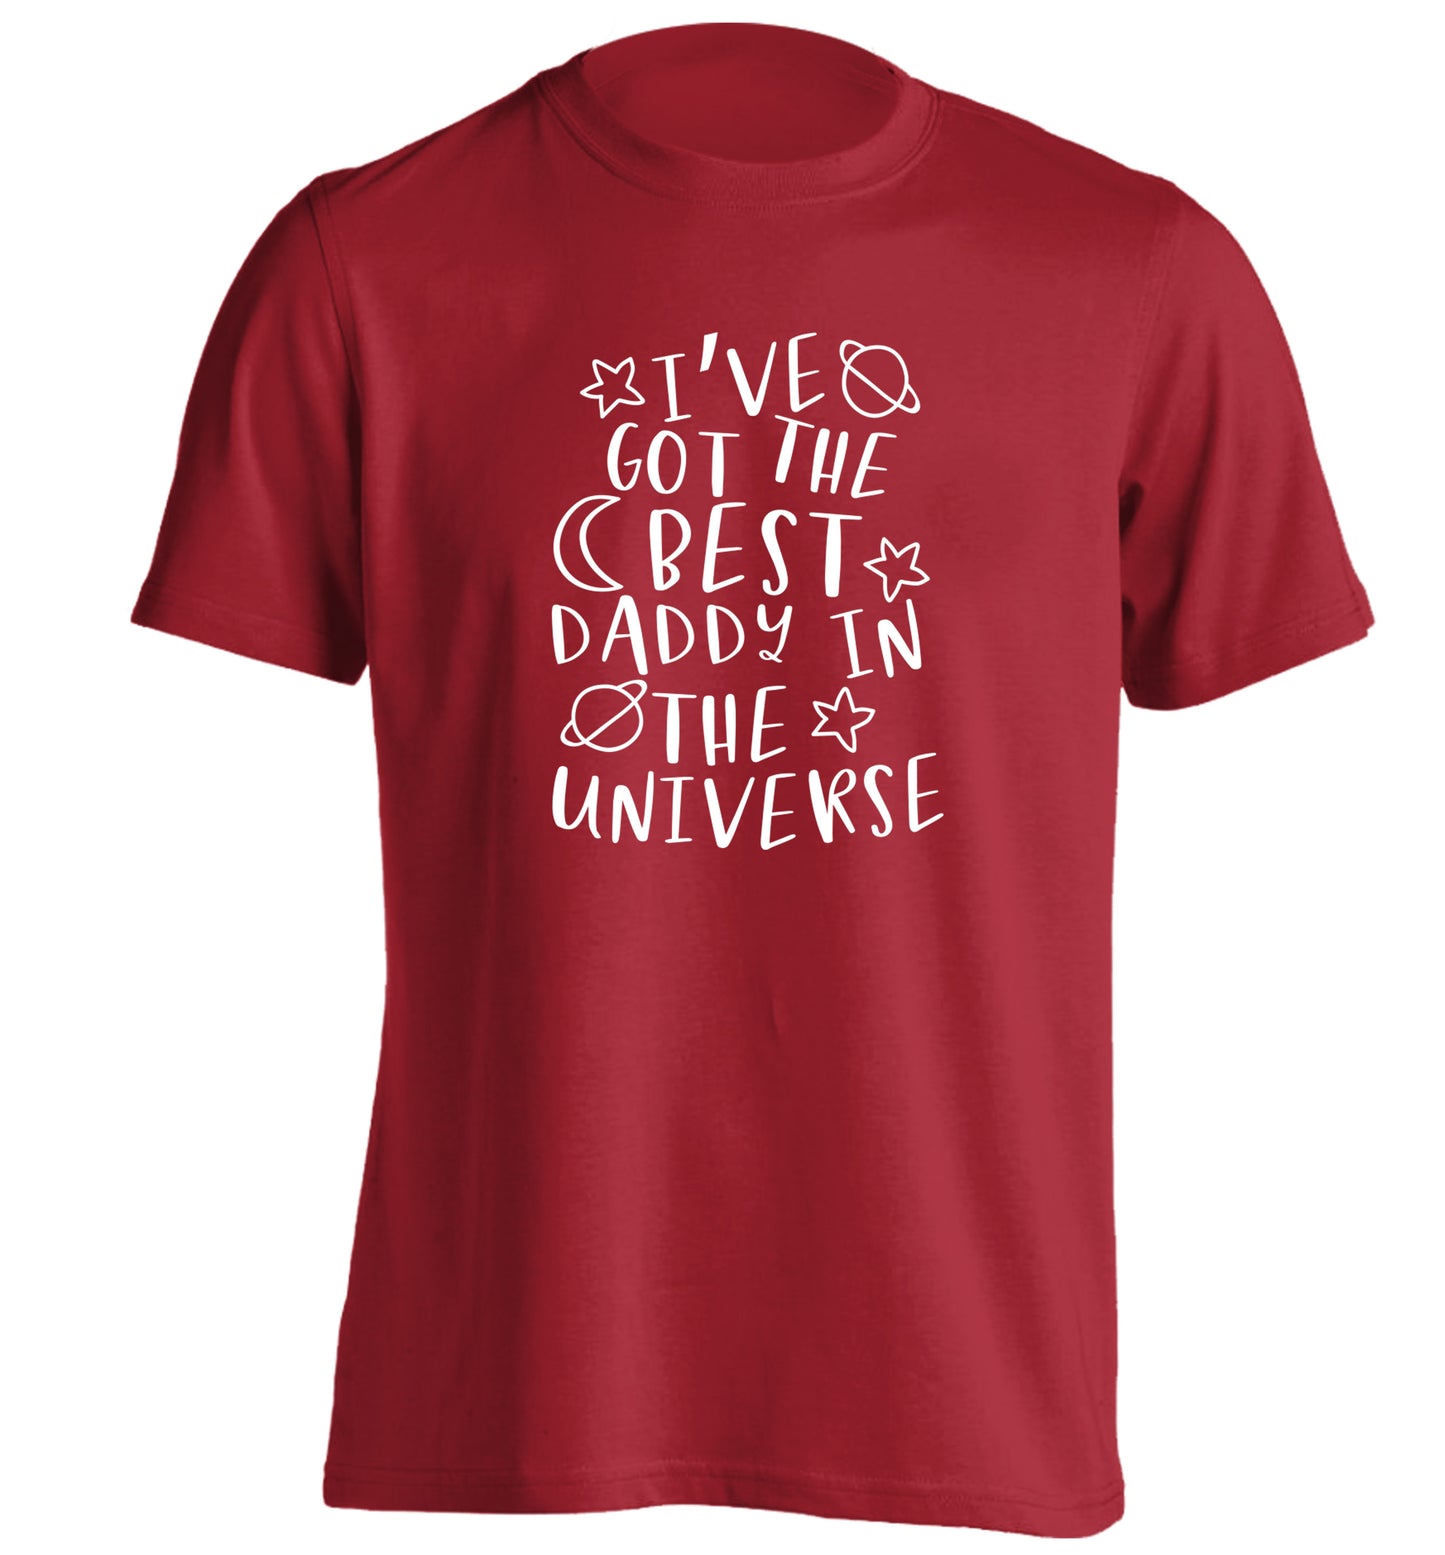 I've got the best daddy in the universe adults unisex red Tshirt 2XL